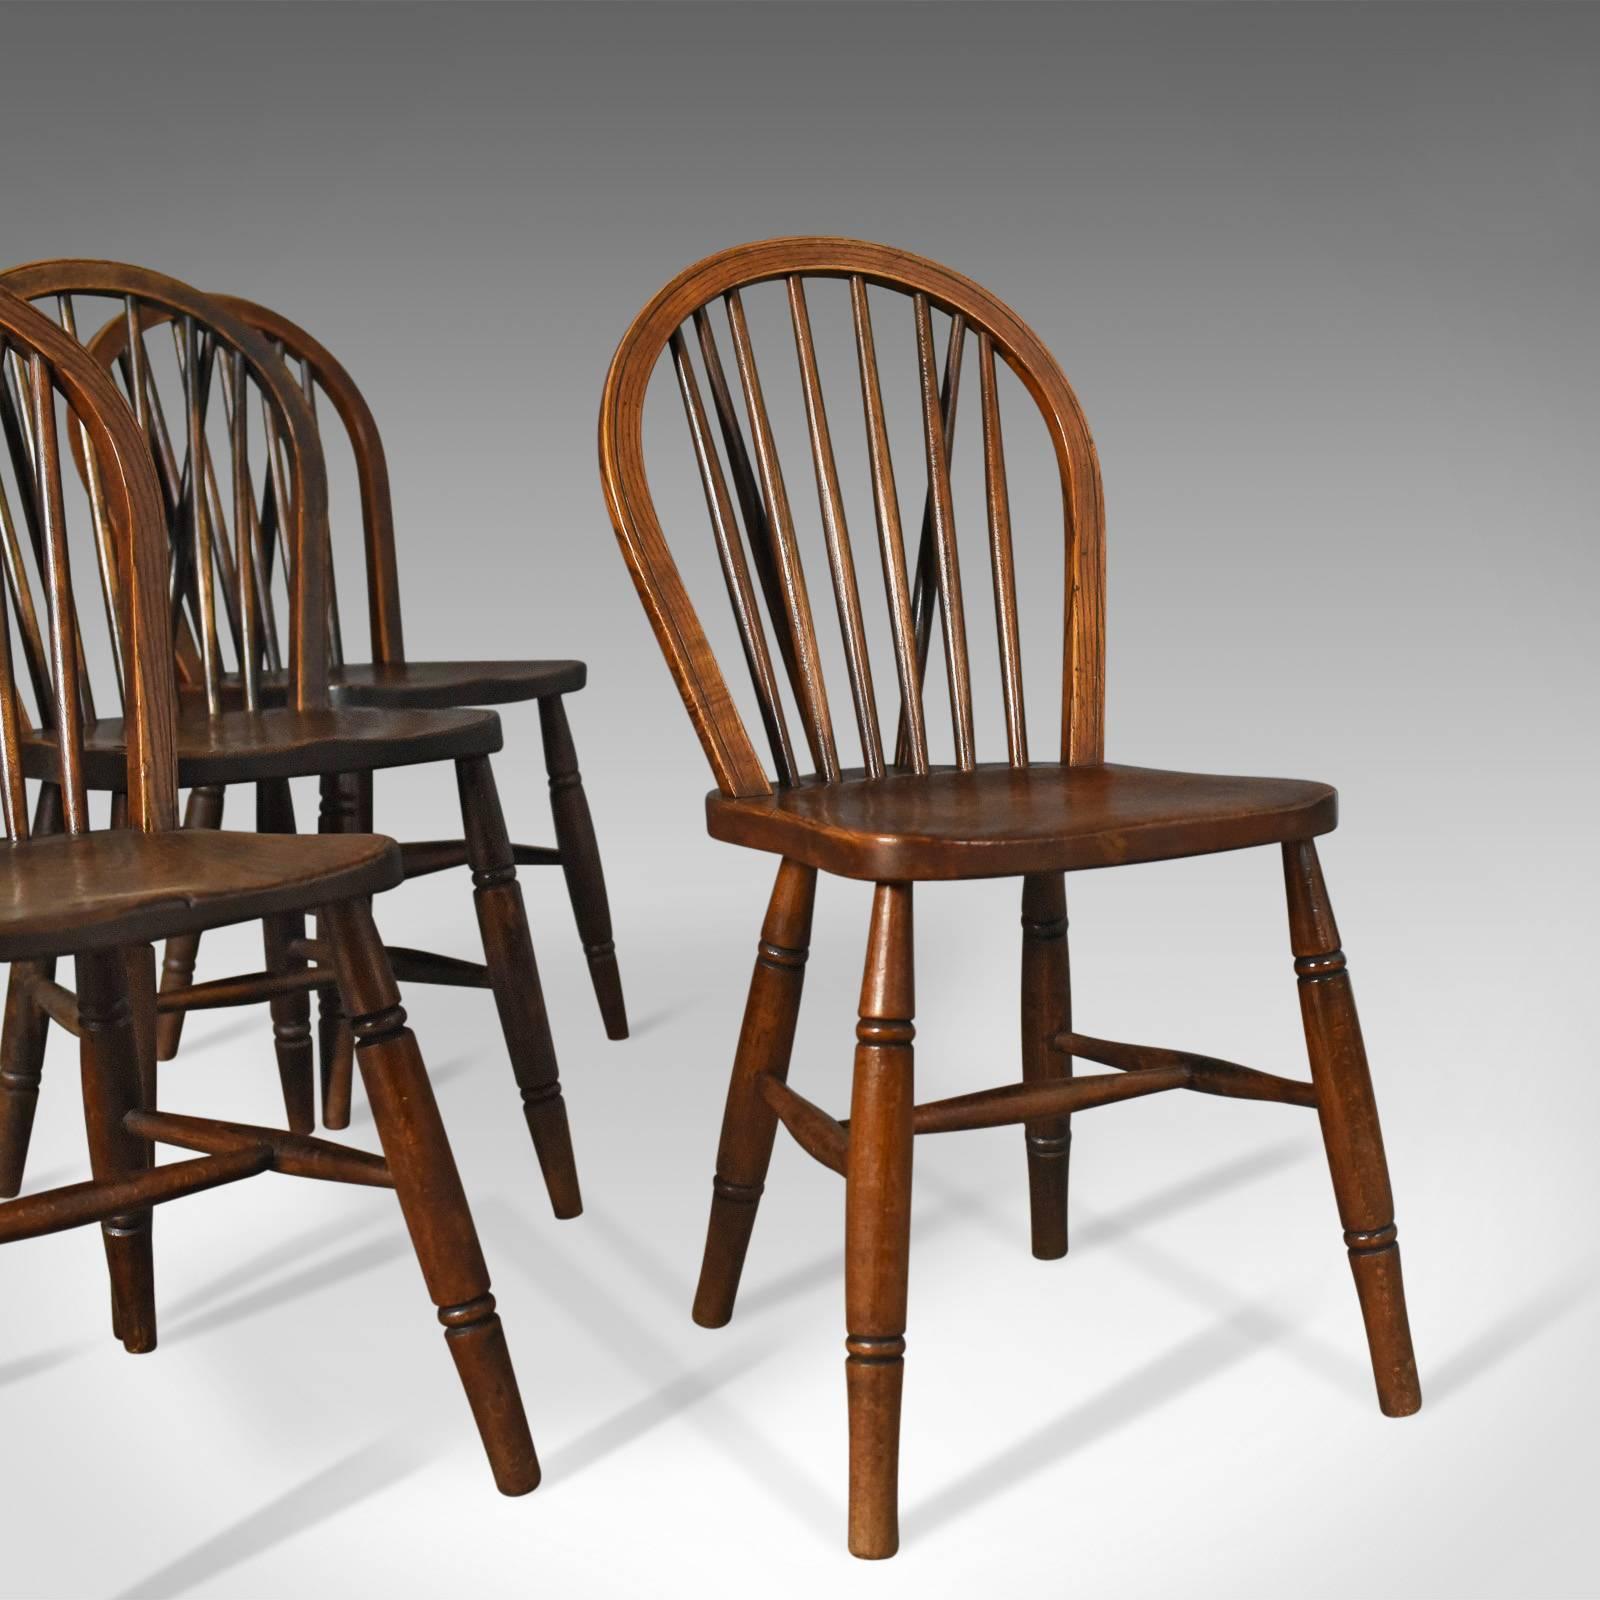 This is a set of four antique Windsor chairs from the High Wycombe area. Hoop back dining chairs with bobbin tail, circa 1880.

Beautifully crafted, country kitchen dining chairs
Good colour with desirable aged patina

Elm saddle seat panels